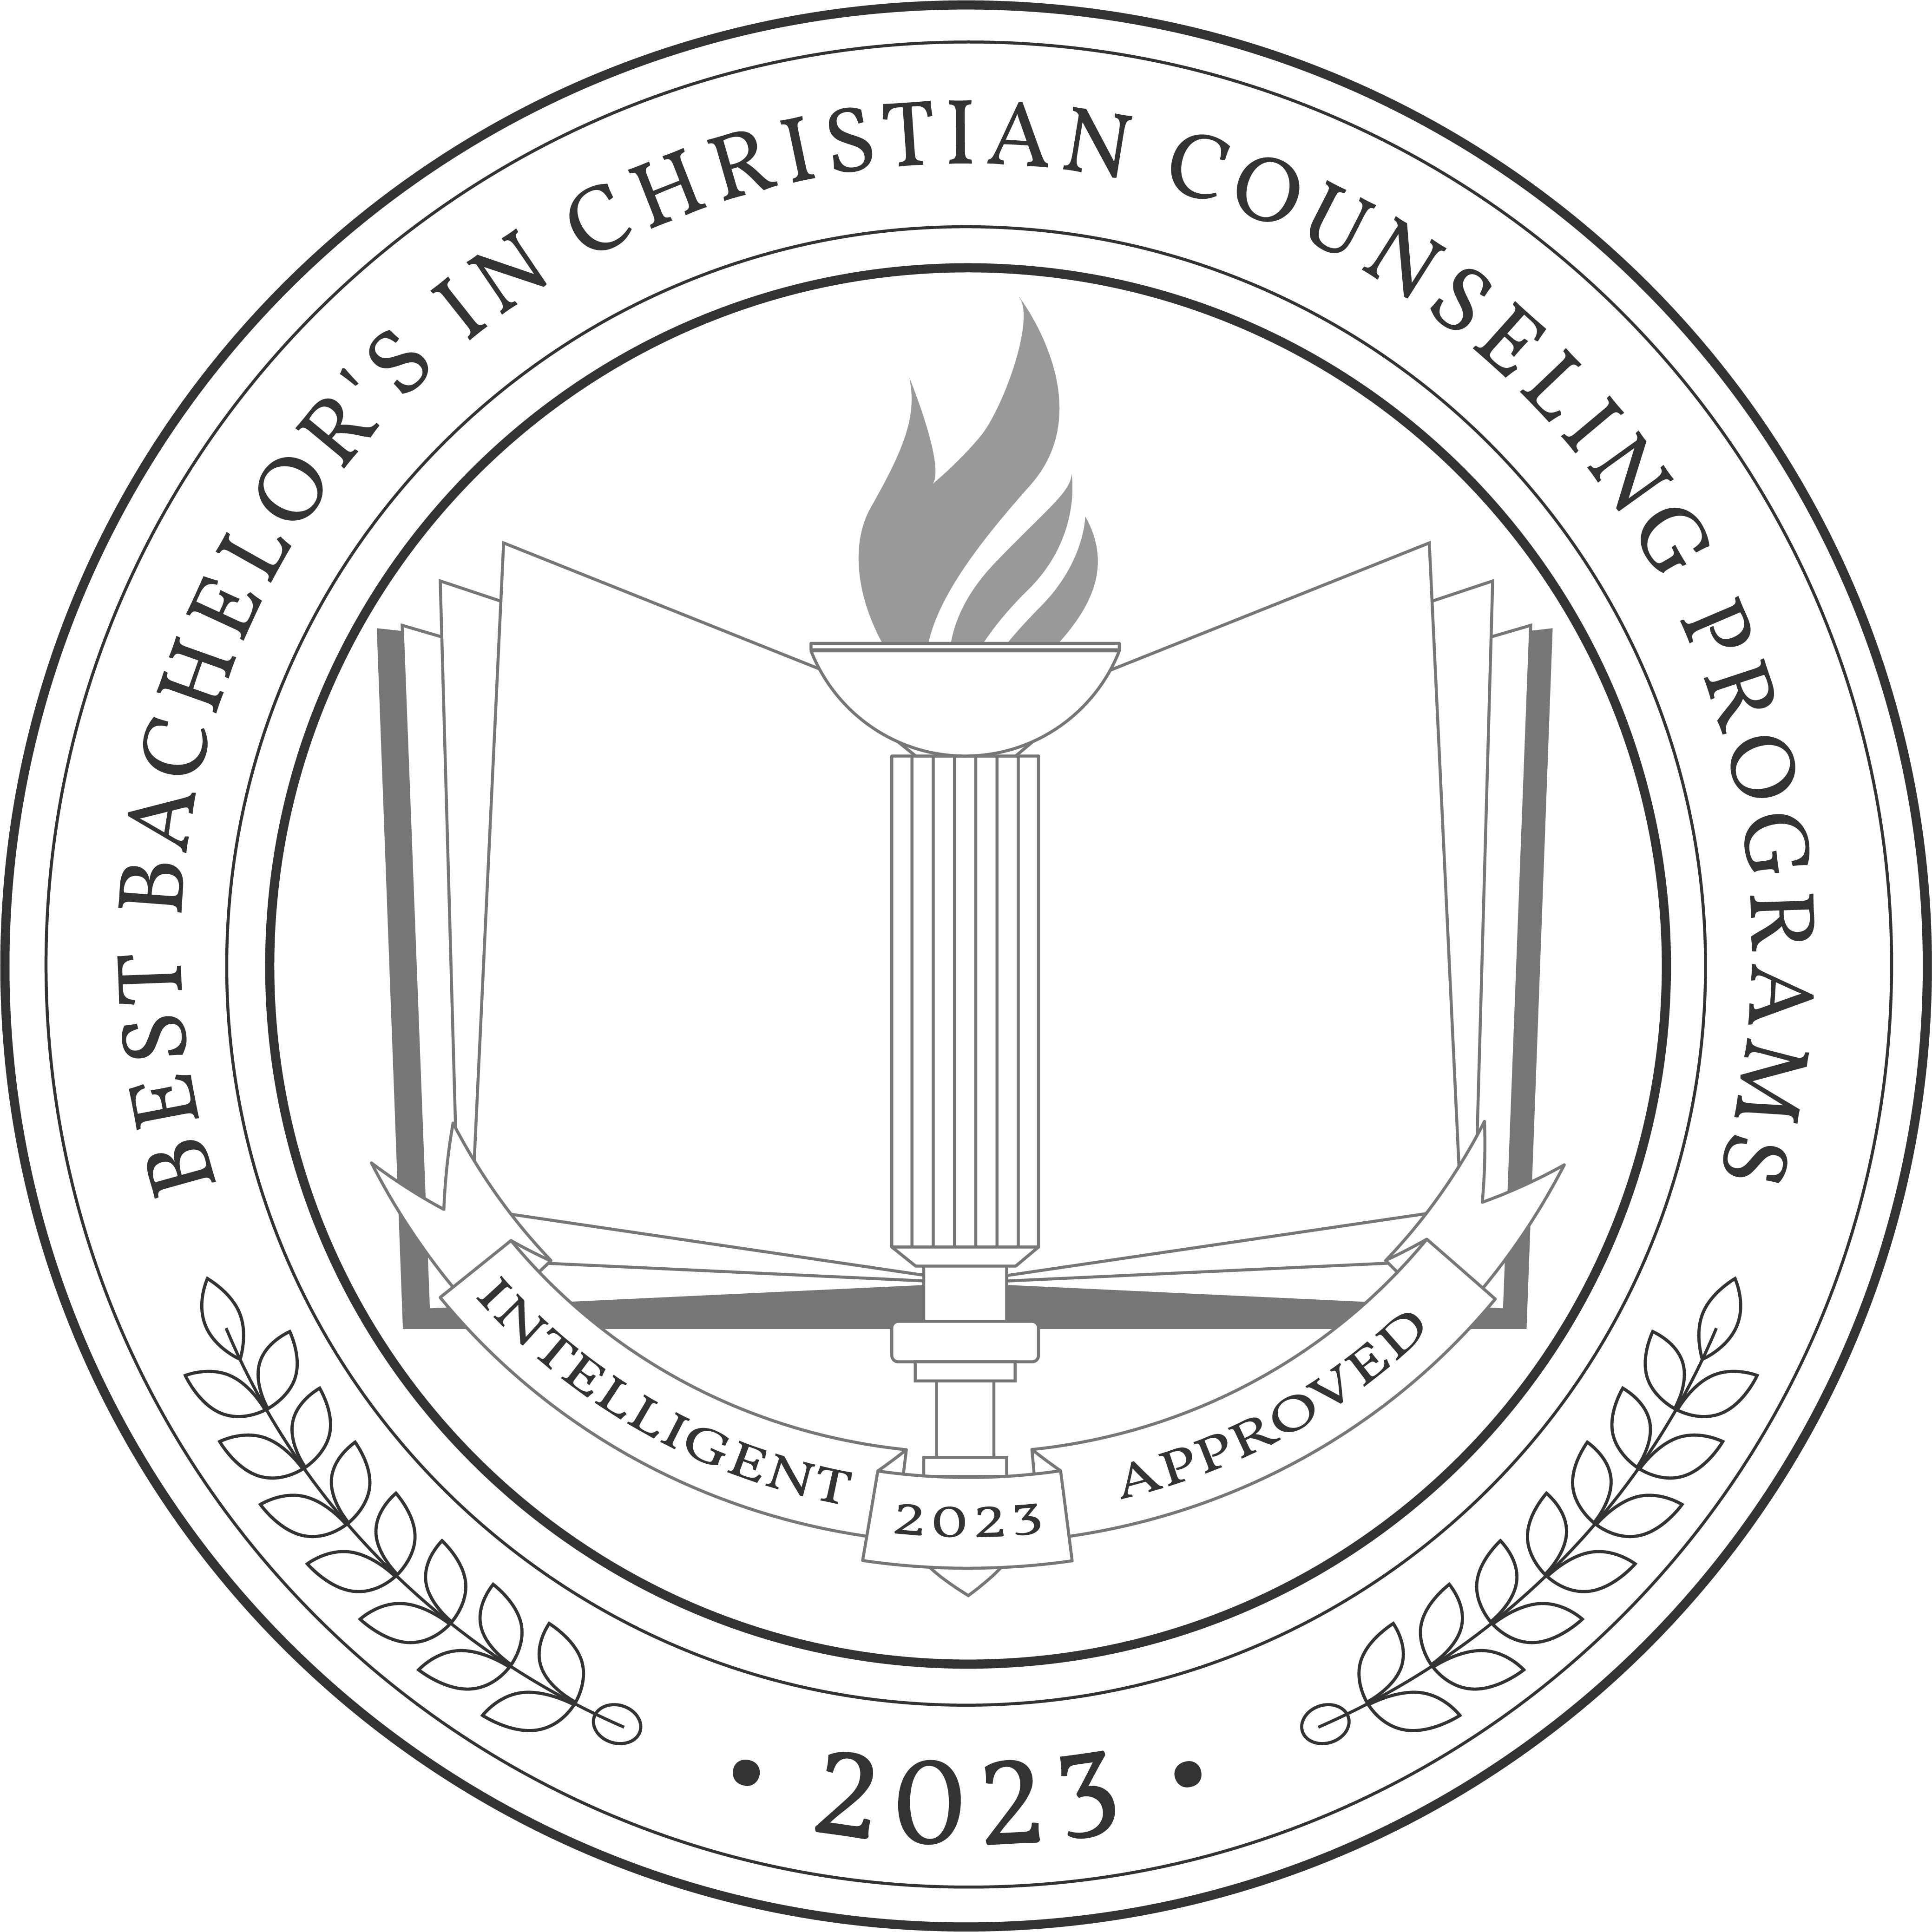 Best Bachelor's in Christian Counseling Programs 2023